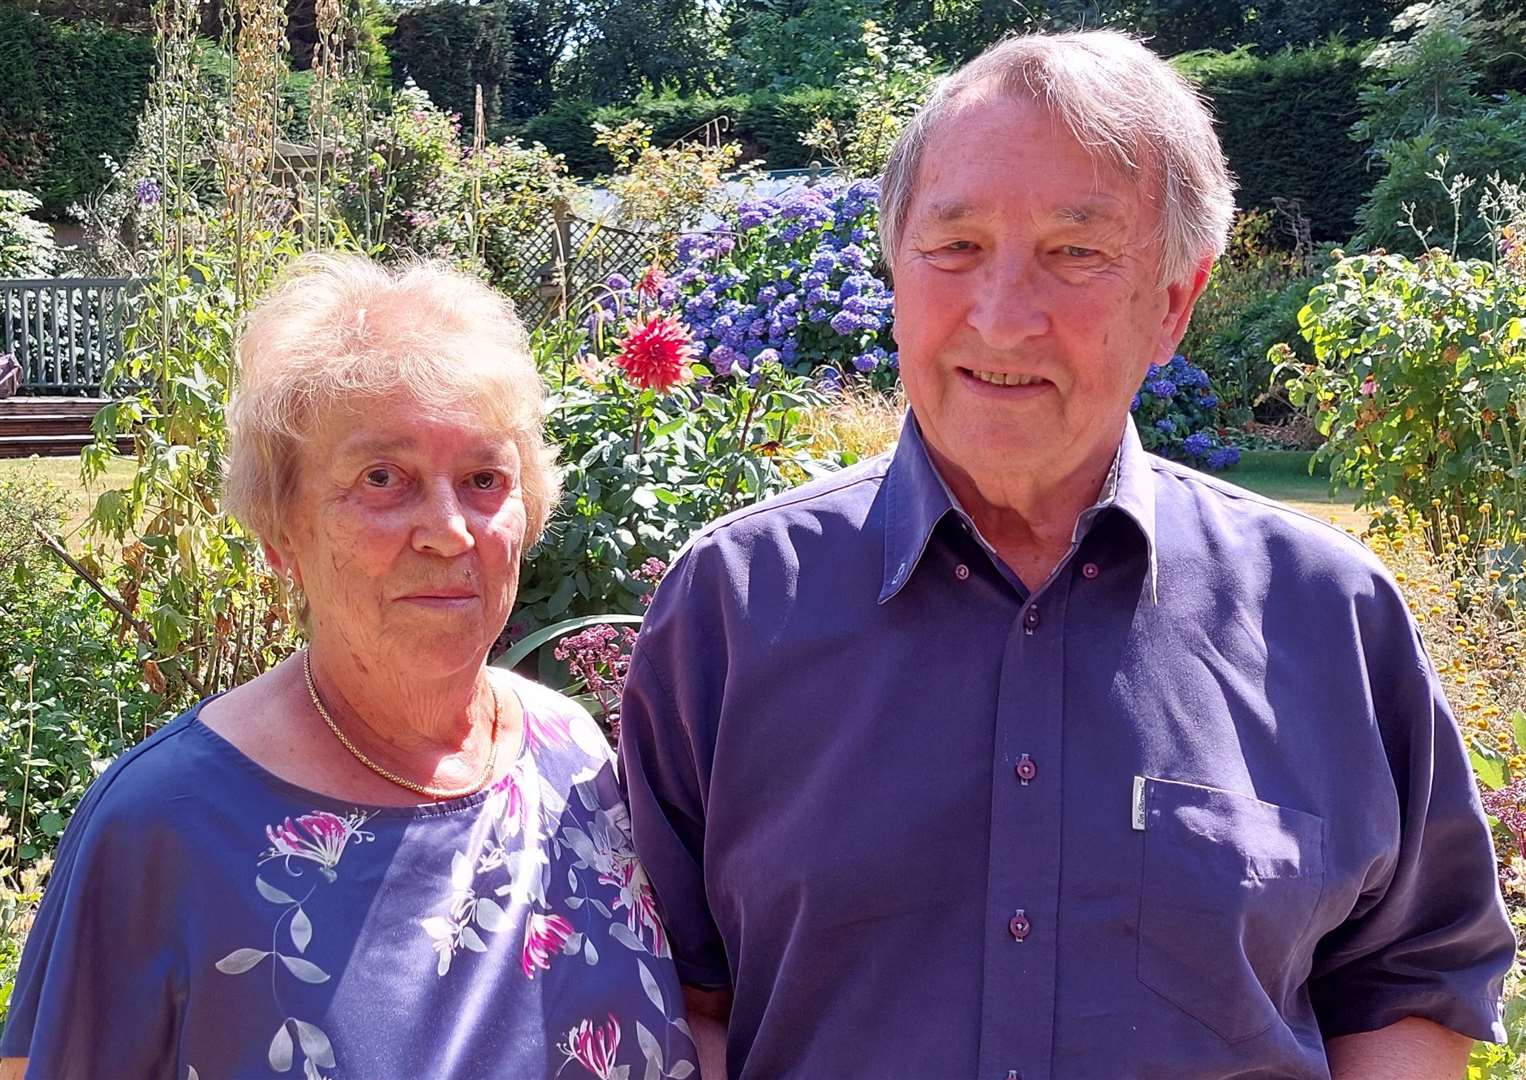 Mike and Christine Campbell from Willesborough